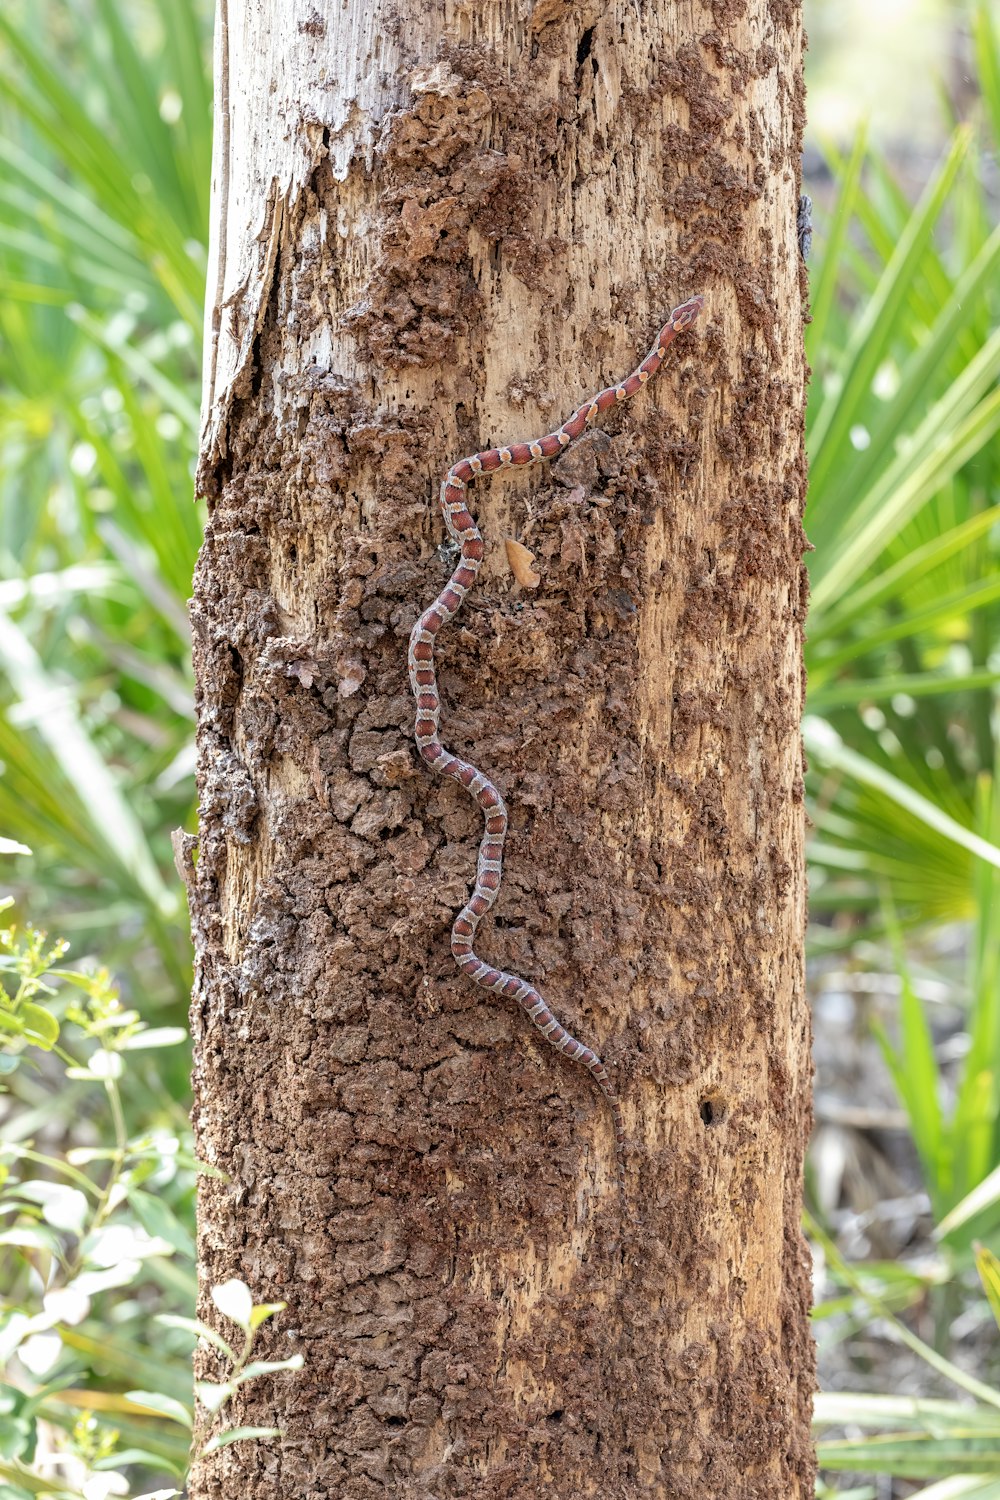 a small lizard crawling on a tree trunk